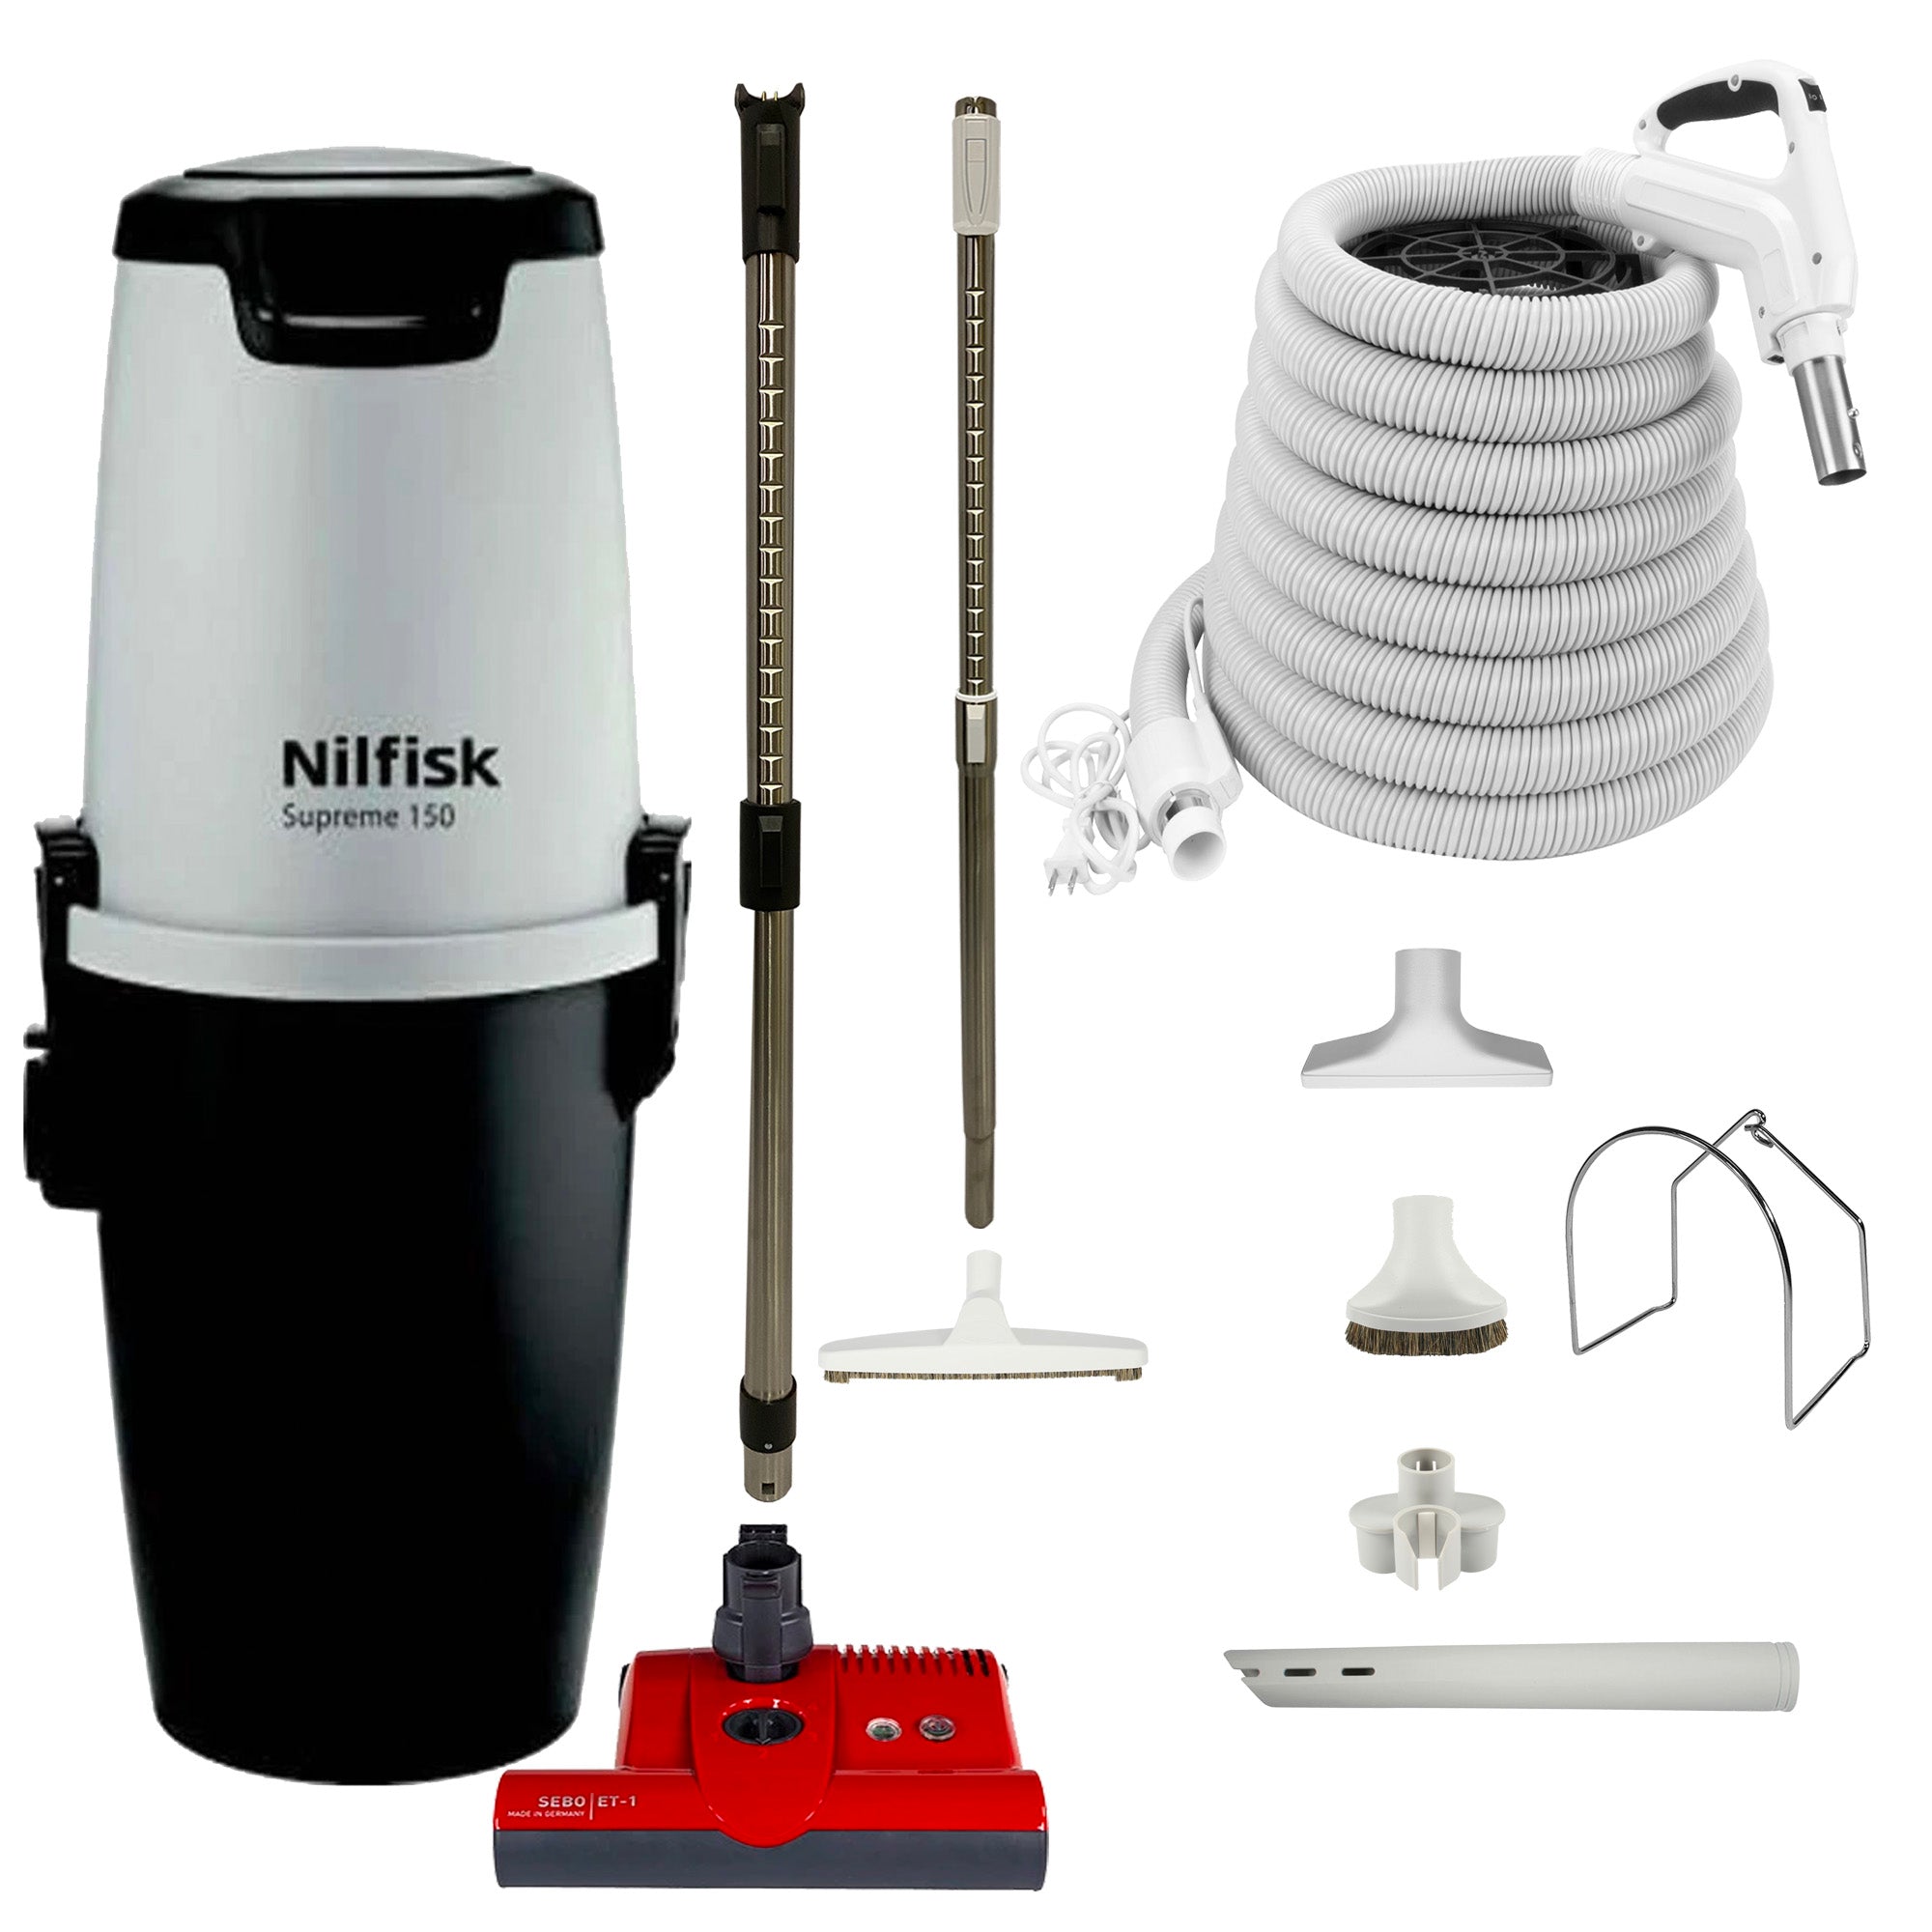 Nilfisk Supreme 150 Central Vacuum with Red SEBO ET-1 Powerhead and Premium Electric Package (White)